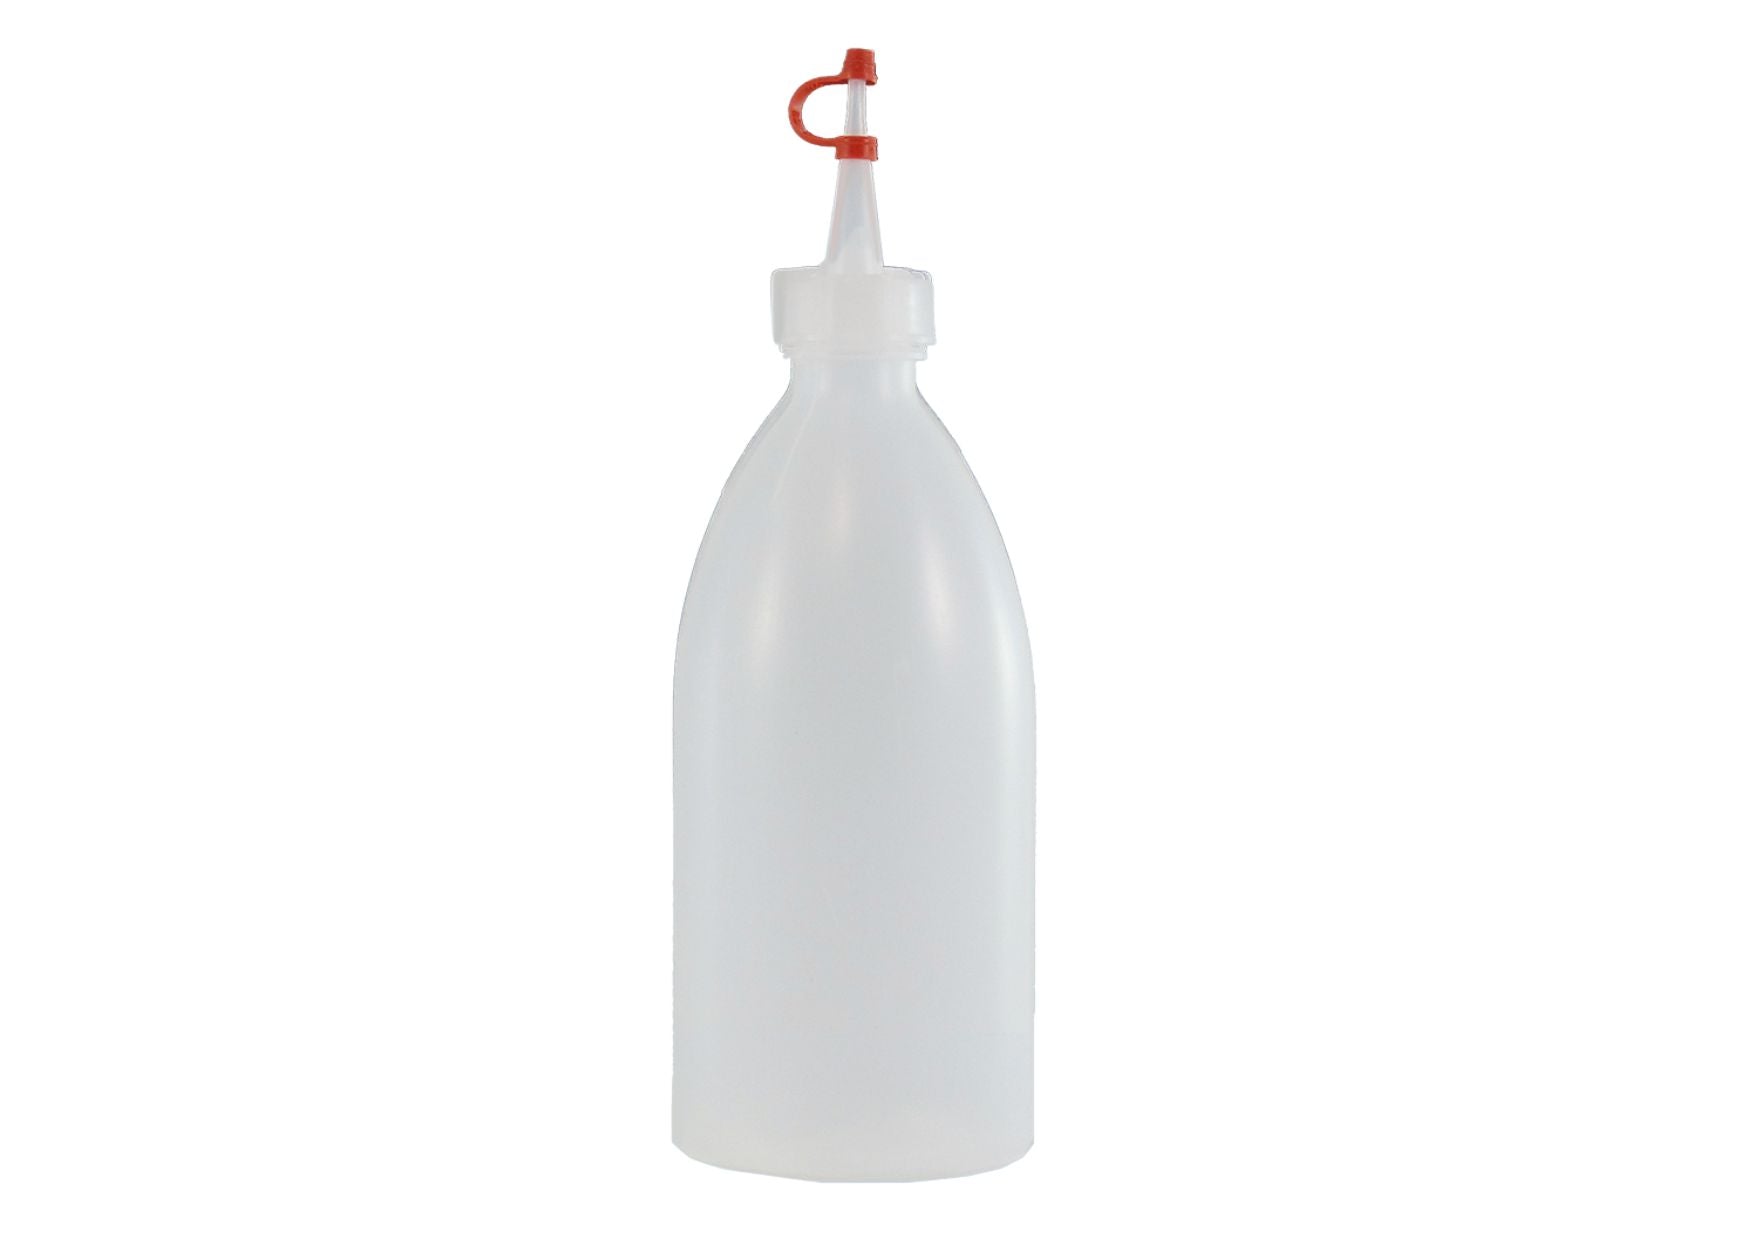 Empty bottle with funnel attachment, 500 ml bottle